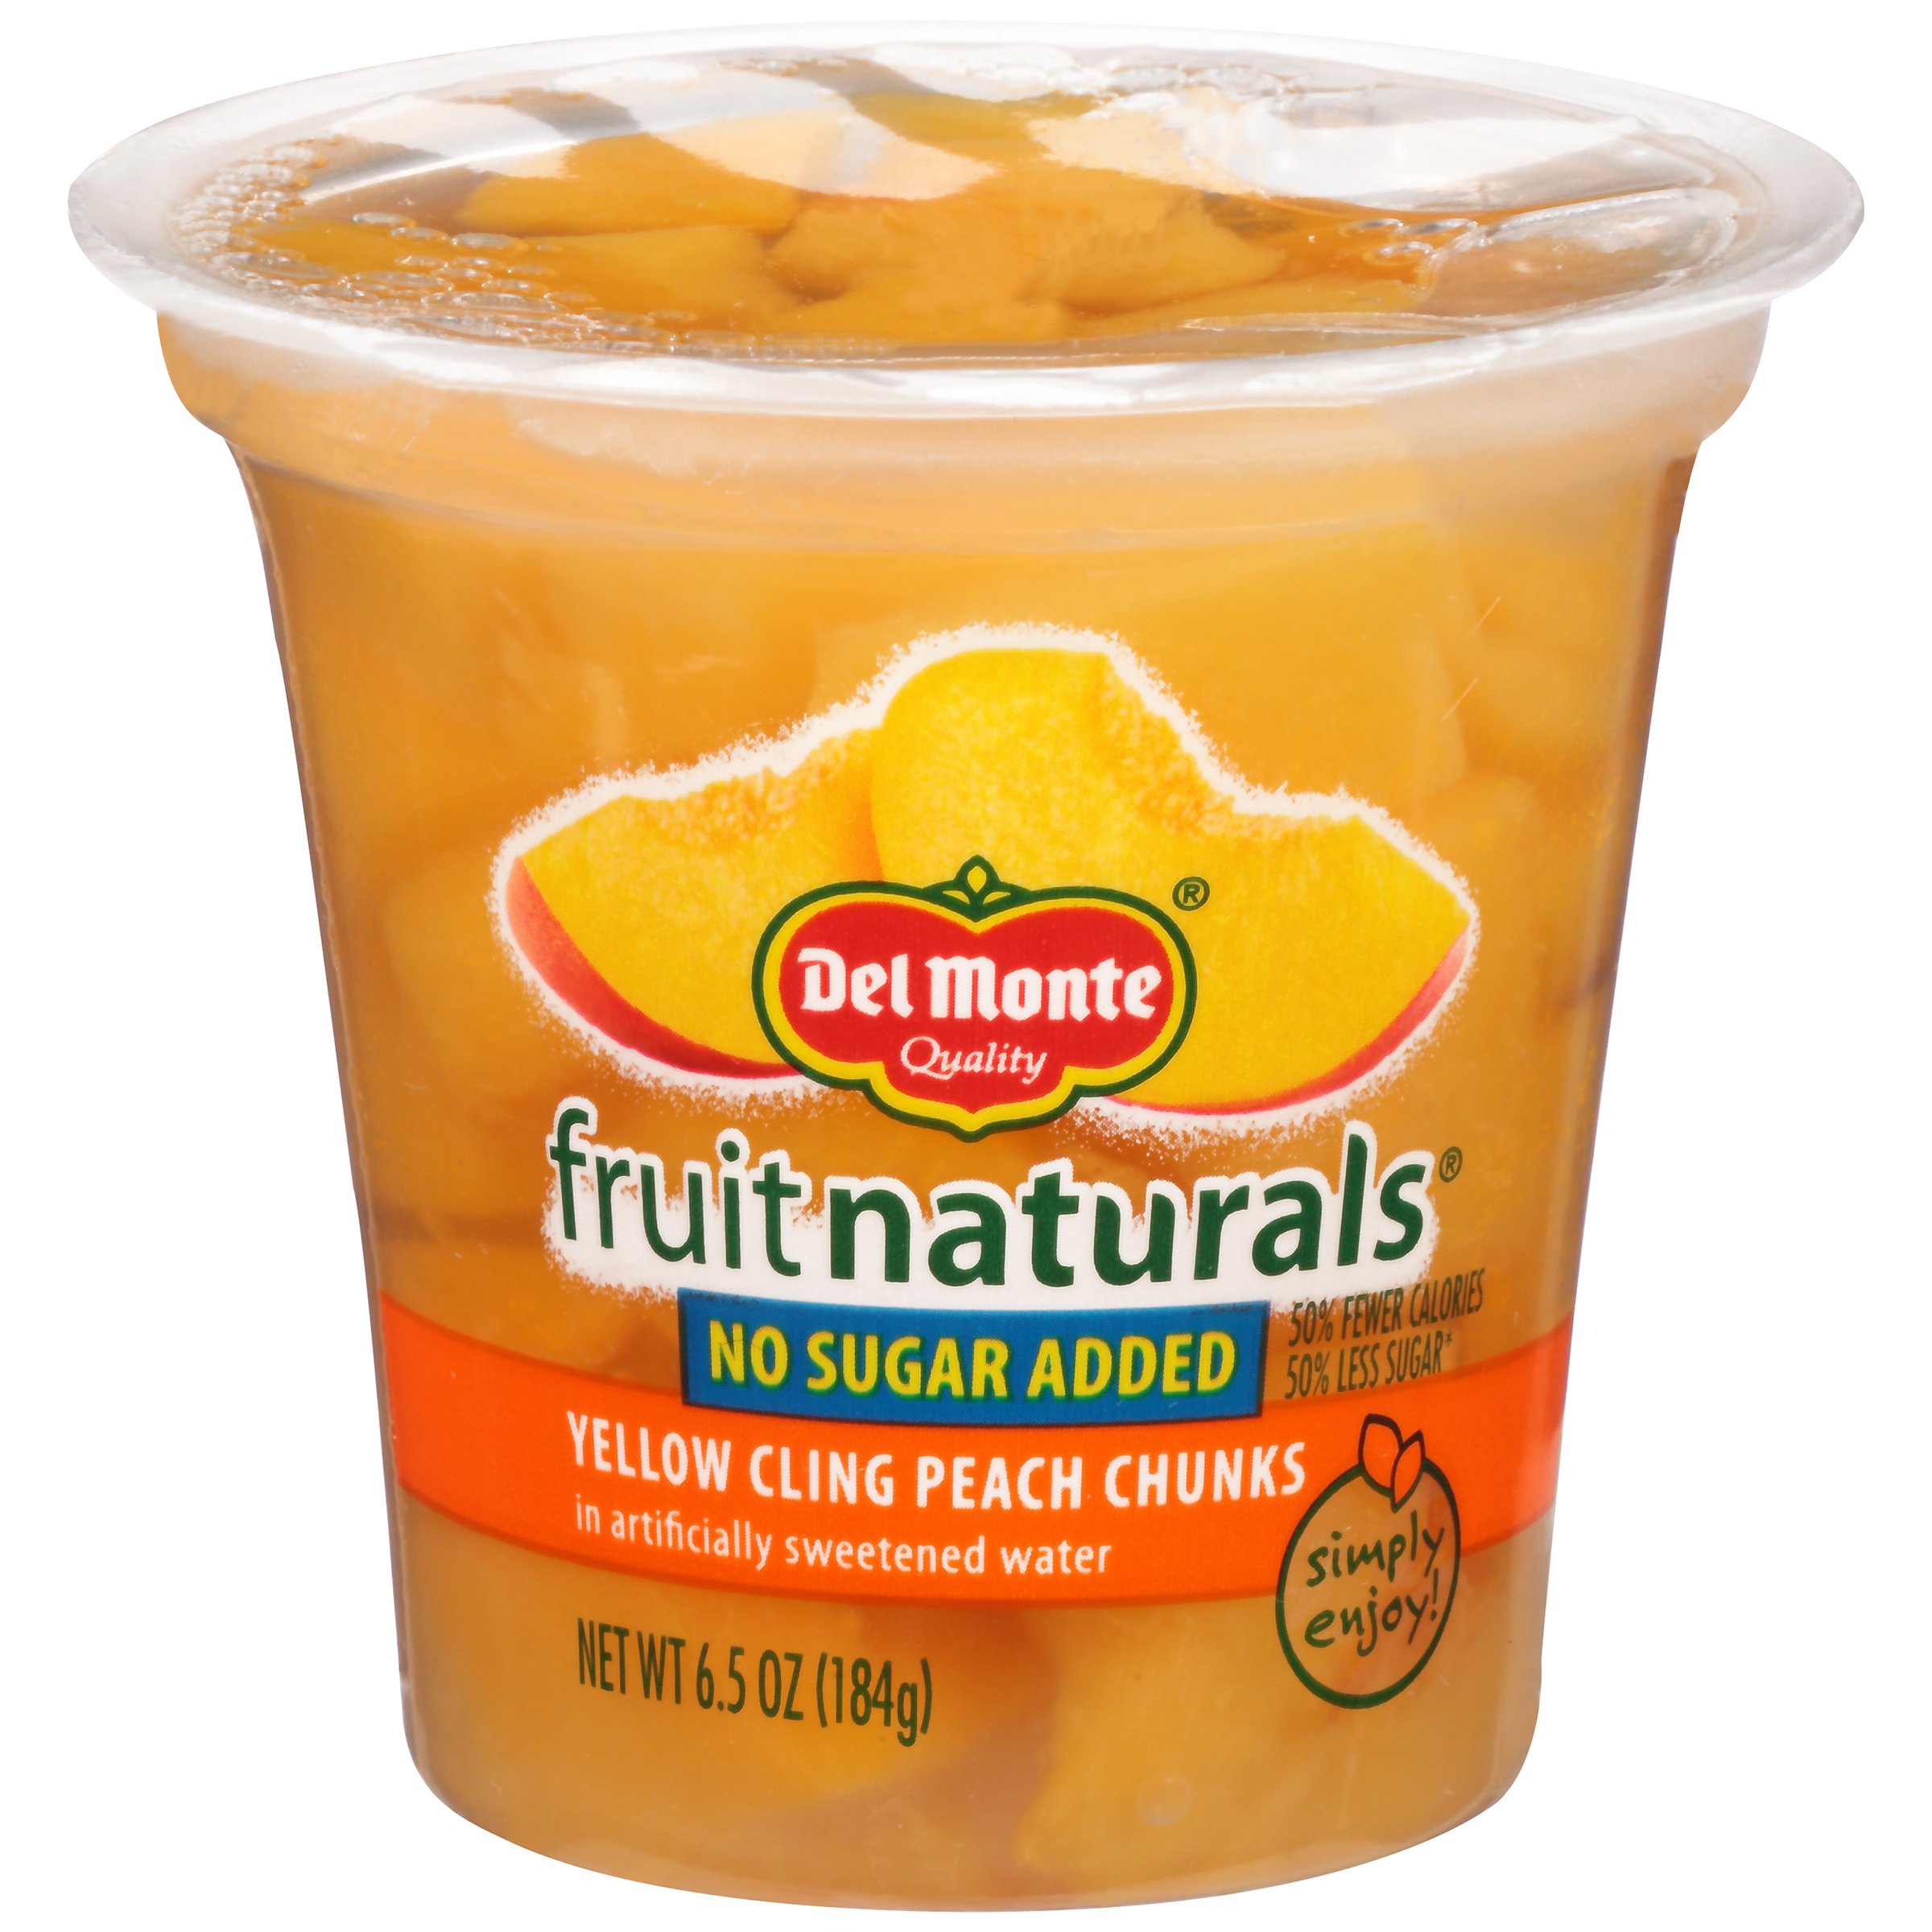 Yellow Cling in Artificially Sweetened Water Peach Chunks